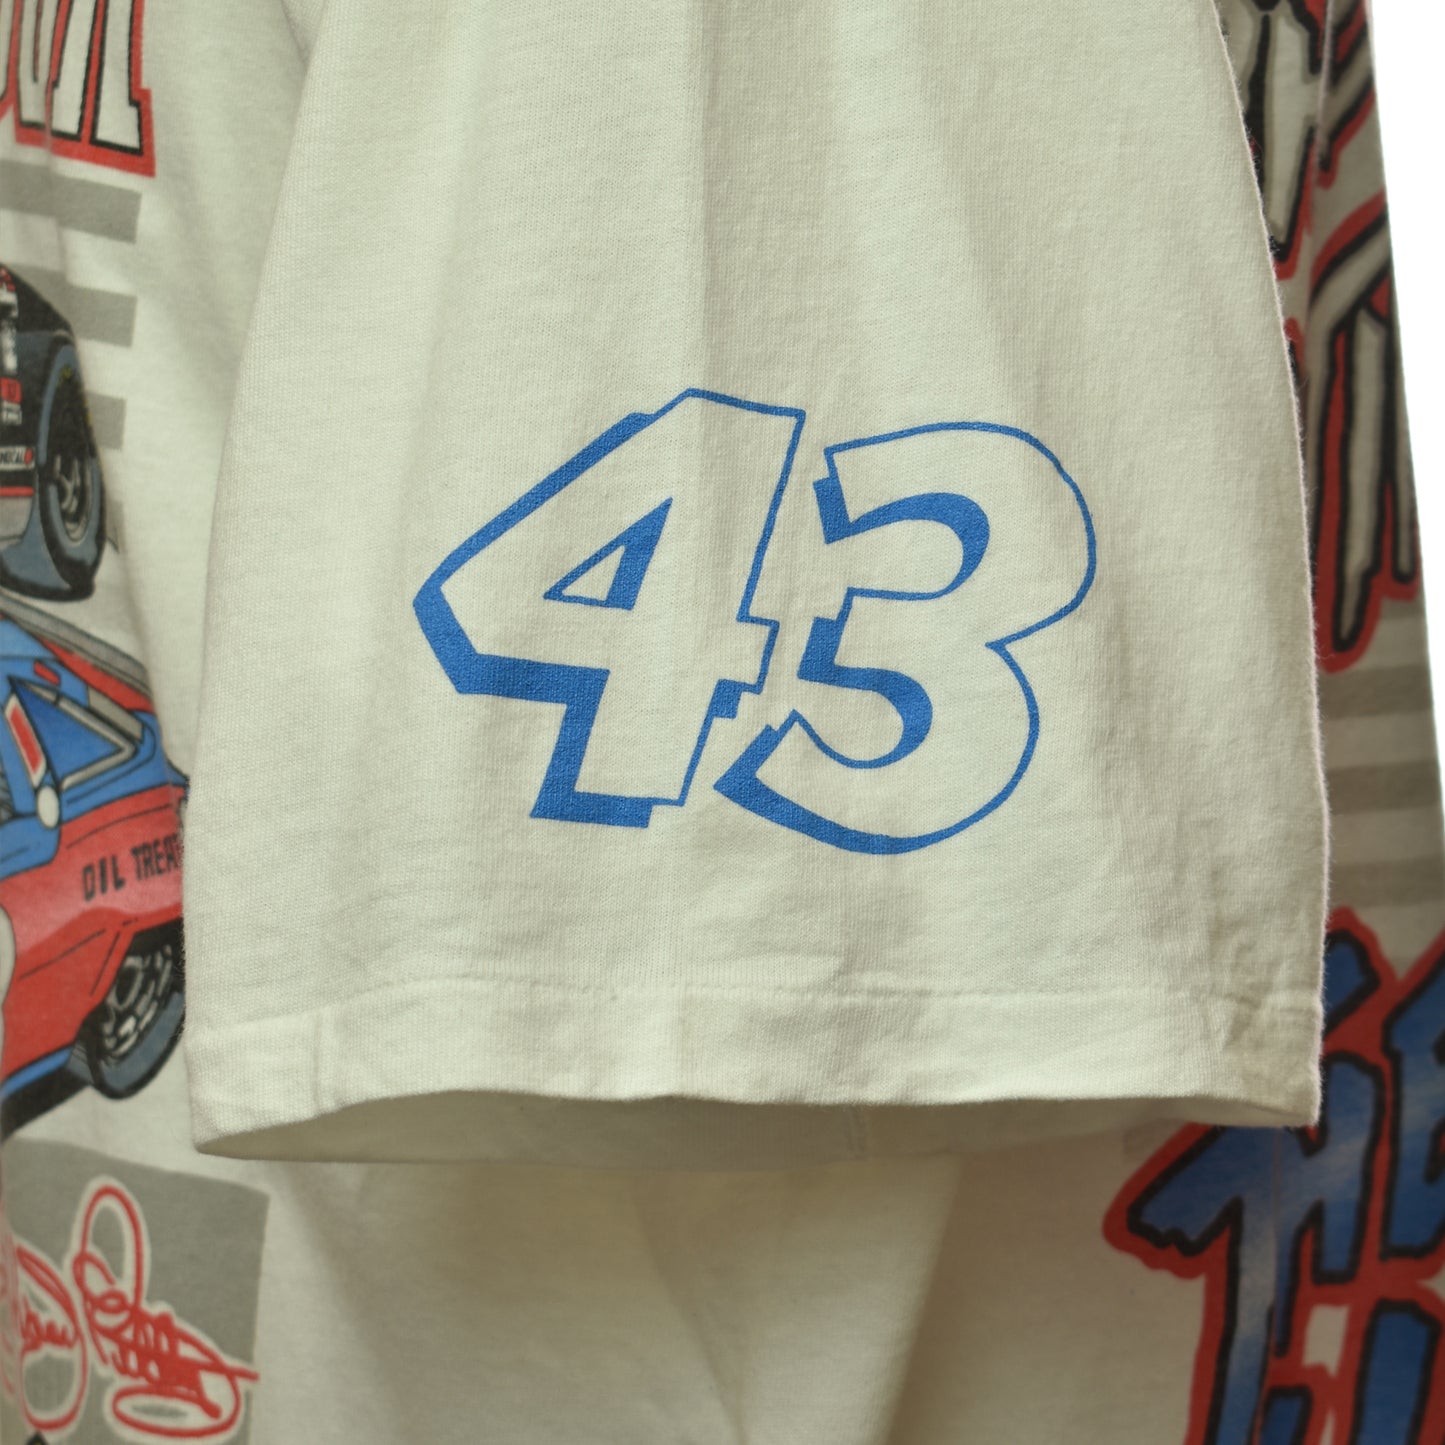 Vintage Rare 90s Dale Earnhard "The Intimidator" & Richard Petty "The King" Nascar Seven and Seven Winston Cup Champions T-shirt Made in USA Size XL